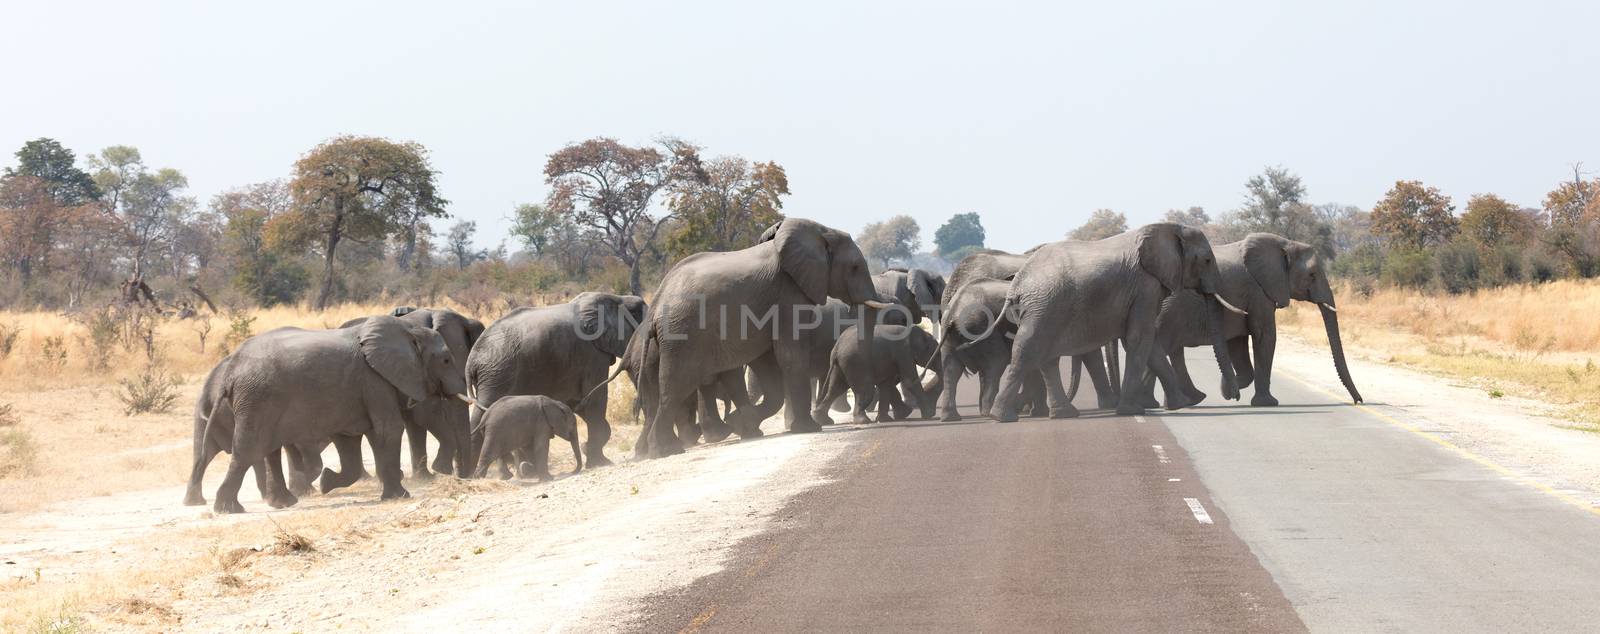 Elephant family crossing a road by michaklootwijk